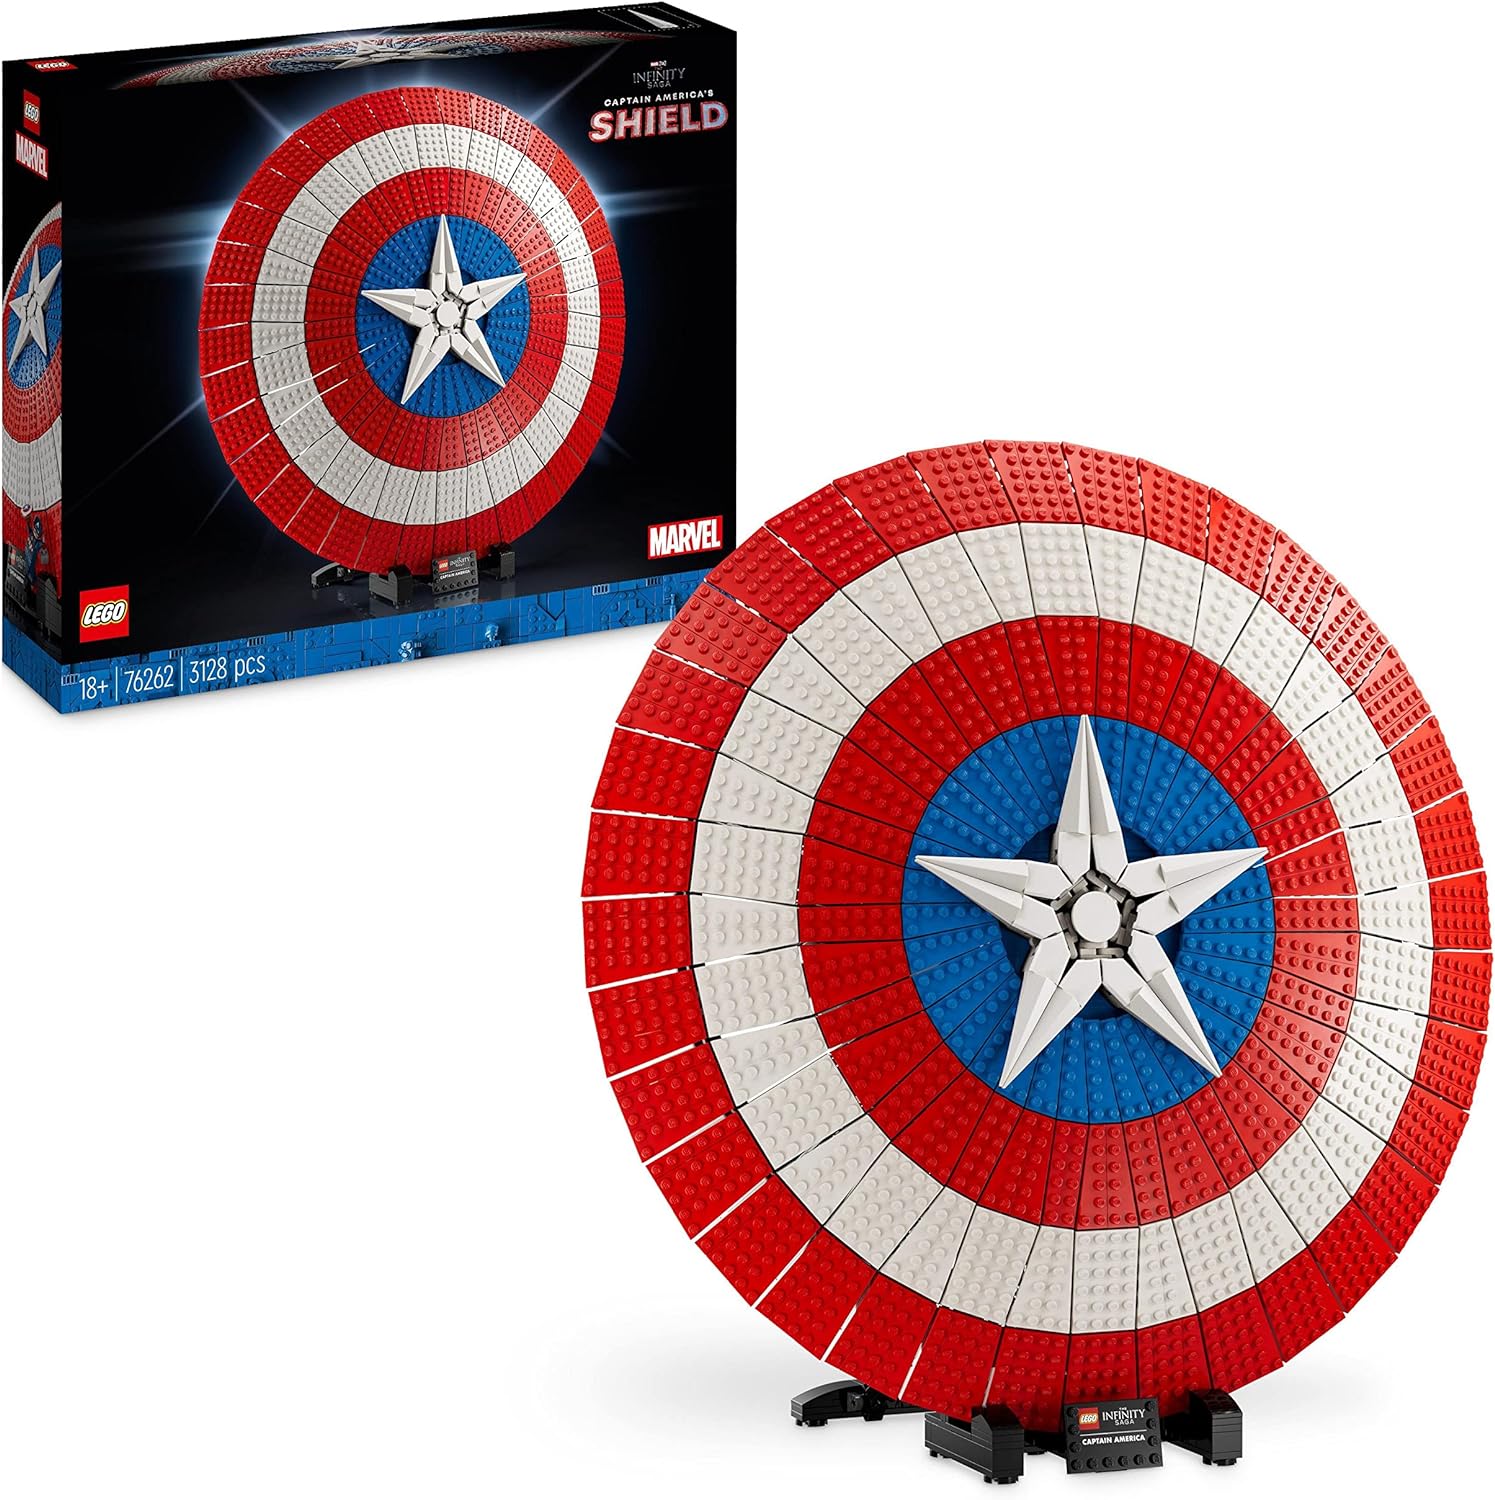 LEGO 76262 Marvel Captain America's Shield Set, Avengers Model Kit for Adults with Mini Figure, Name Plate and Thor\'s Hammer, Collectable Infinity Saga Gift Idea for Men, Women, Him, Her